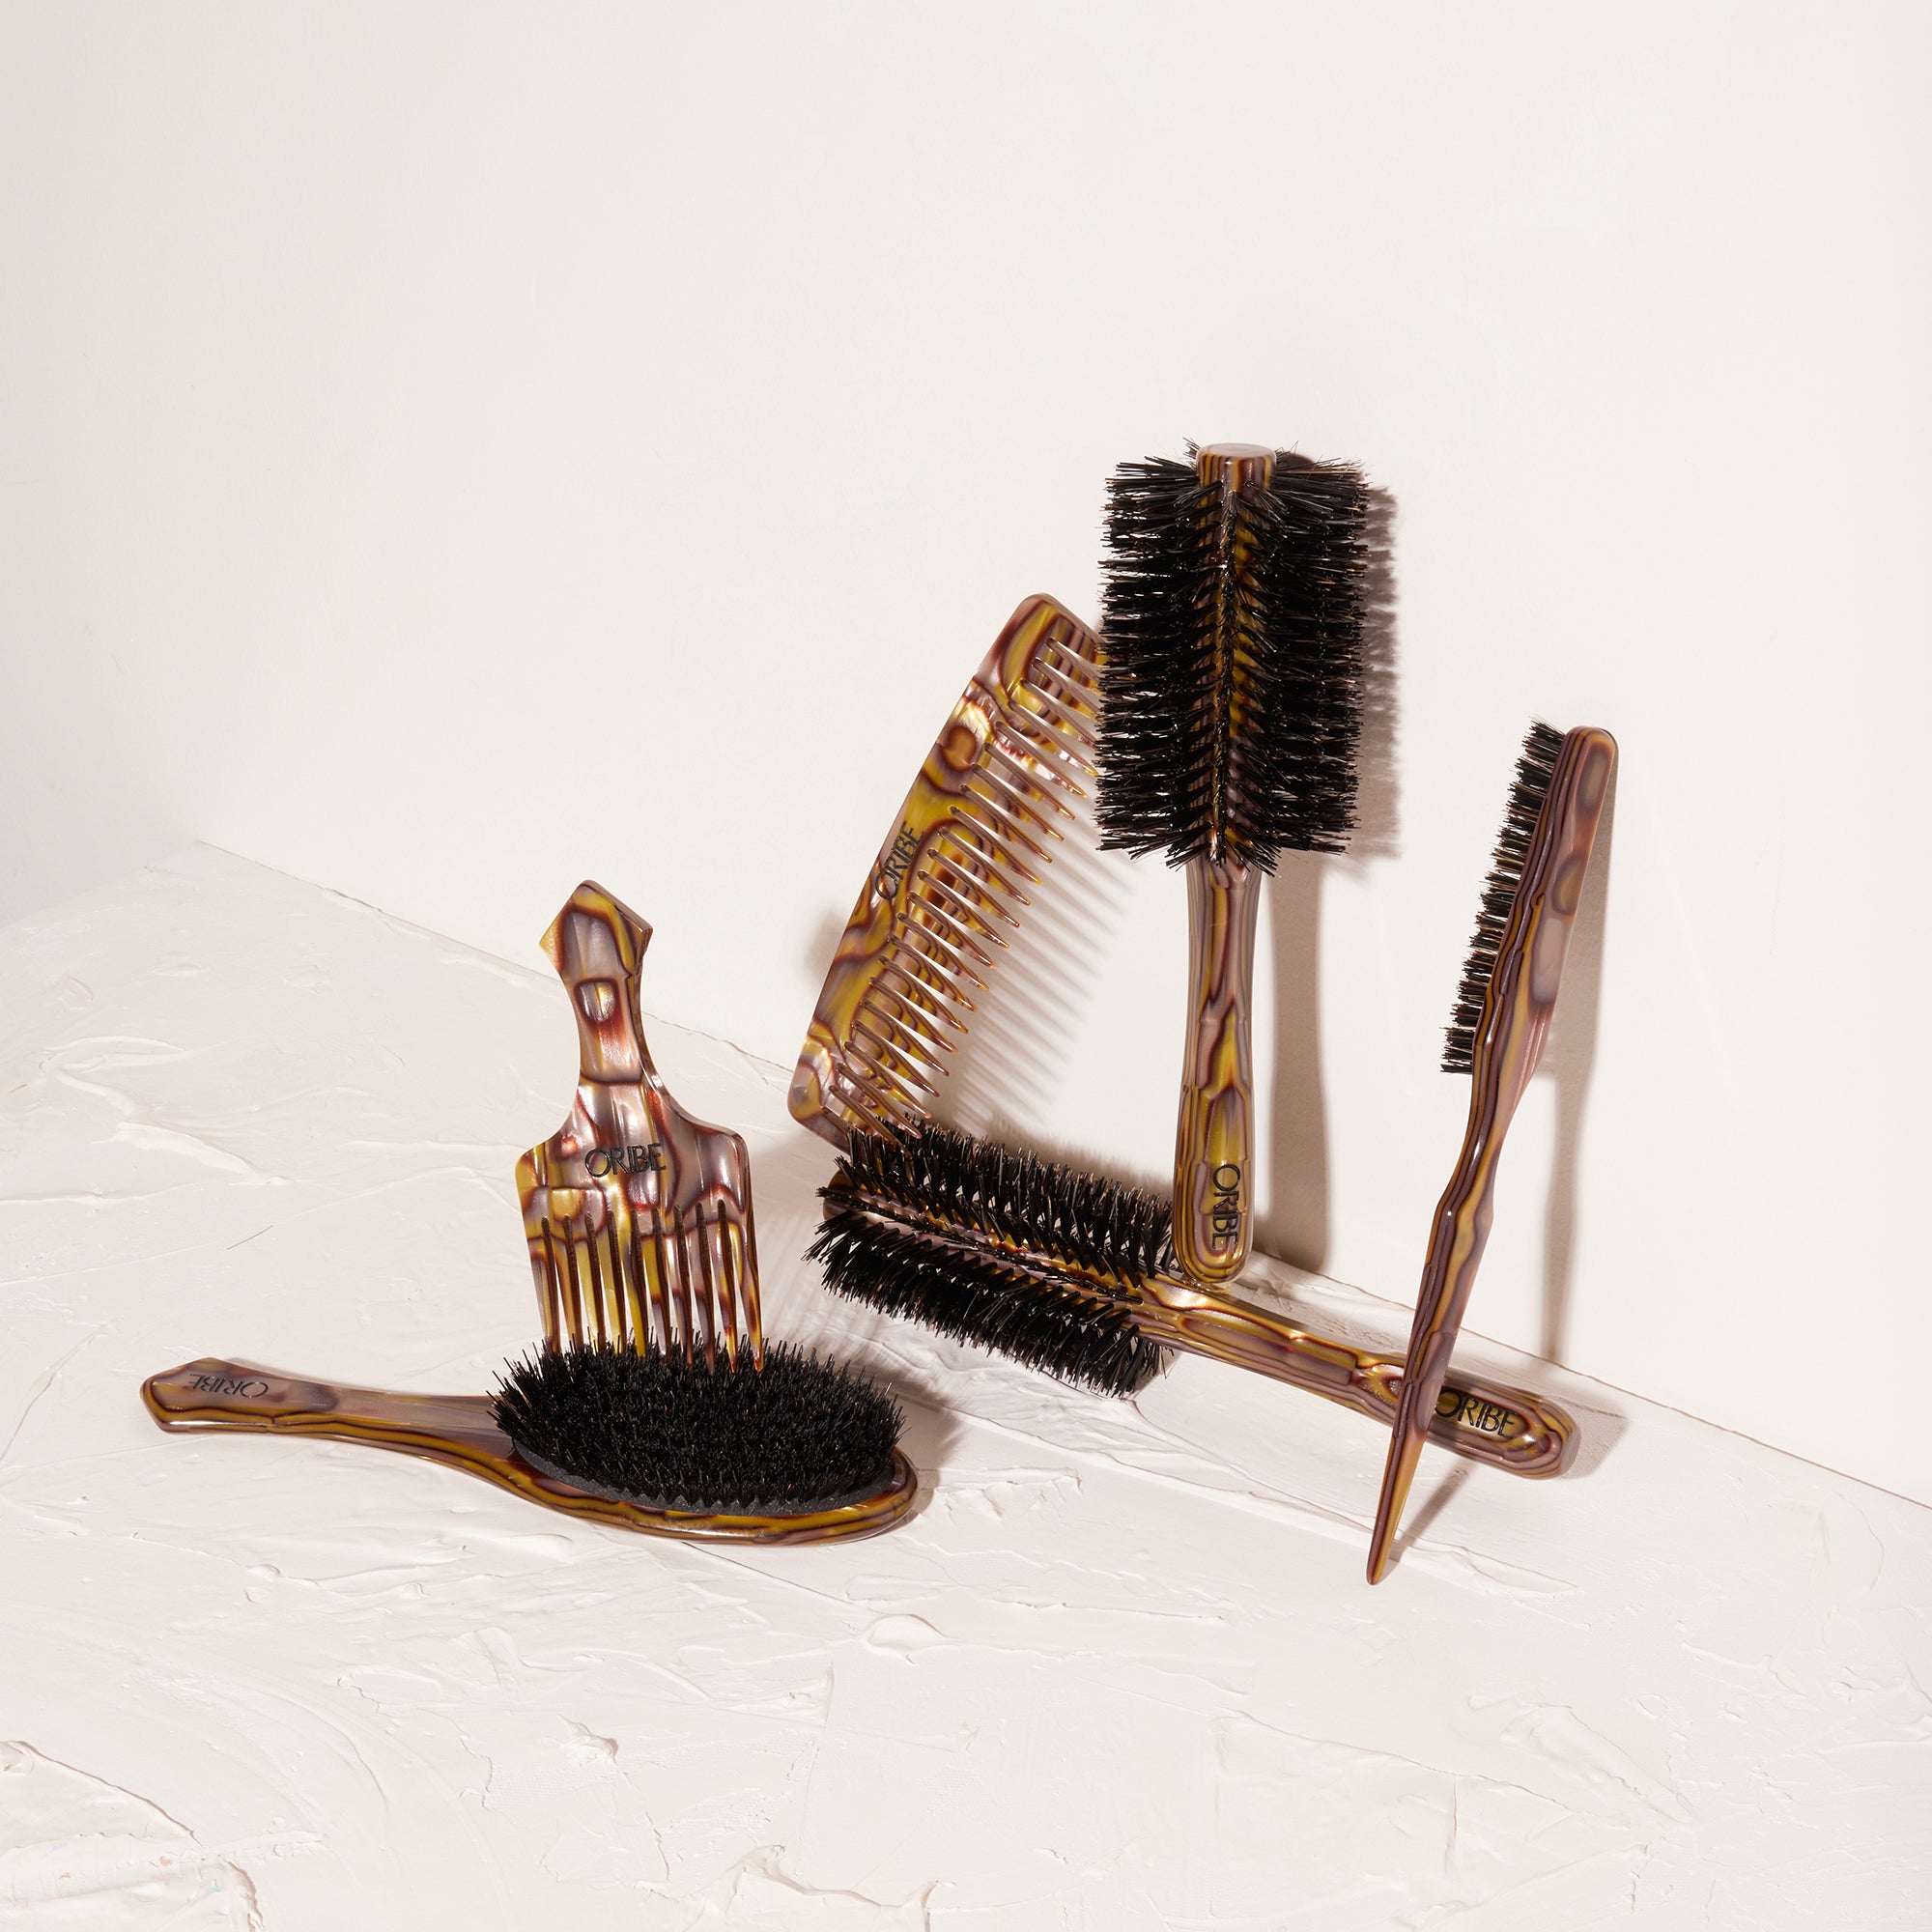 Wooden Brushes and Combs handmade in Italy